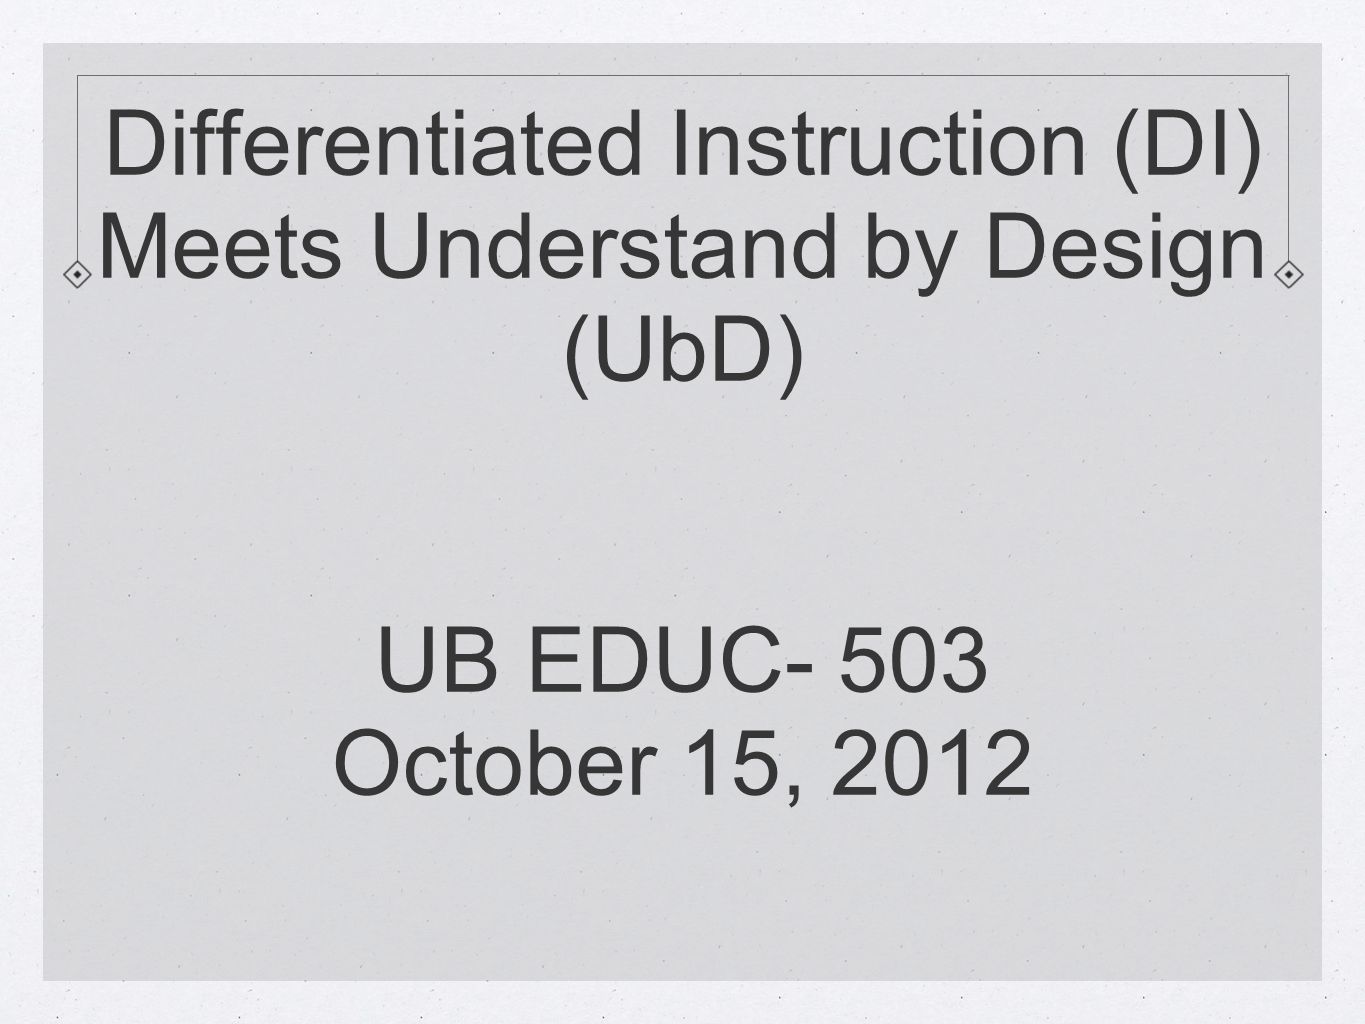 Differentiated Instruction (DI) Meets Understand by Design (UbD) UB EDUC- 503 October 15, 2012